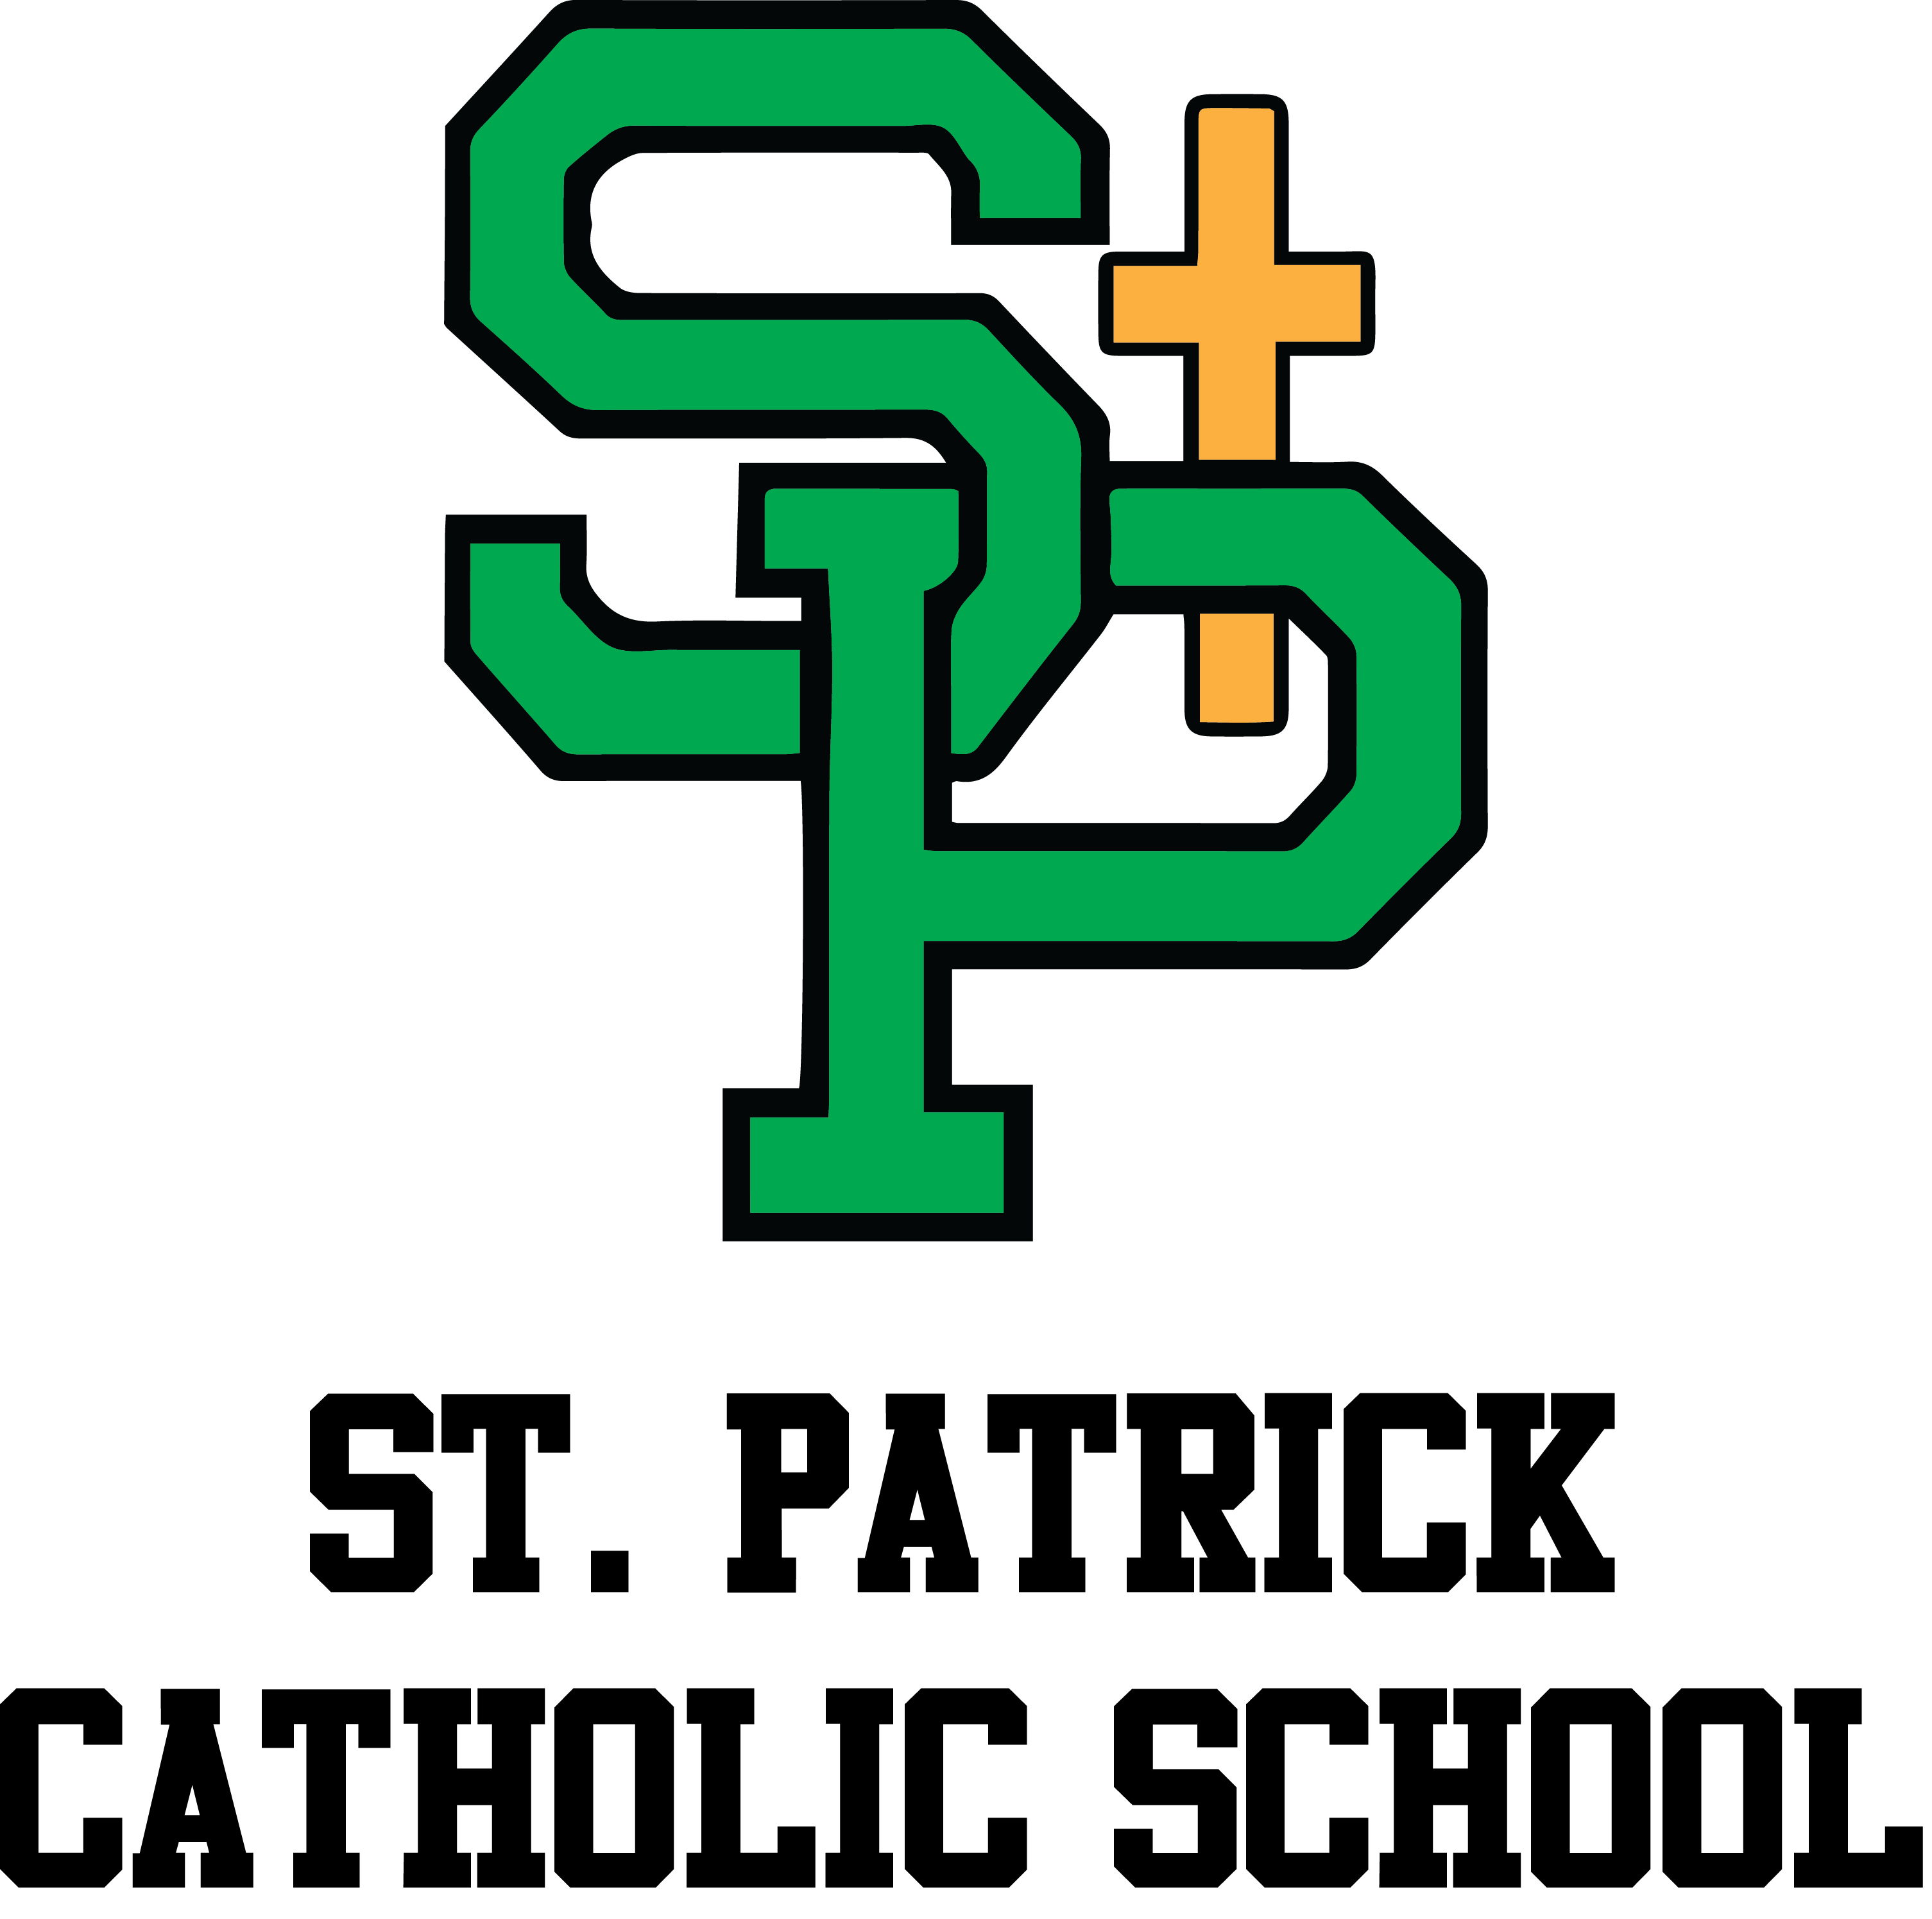 Green S P logo with cross for St. Patrick School